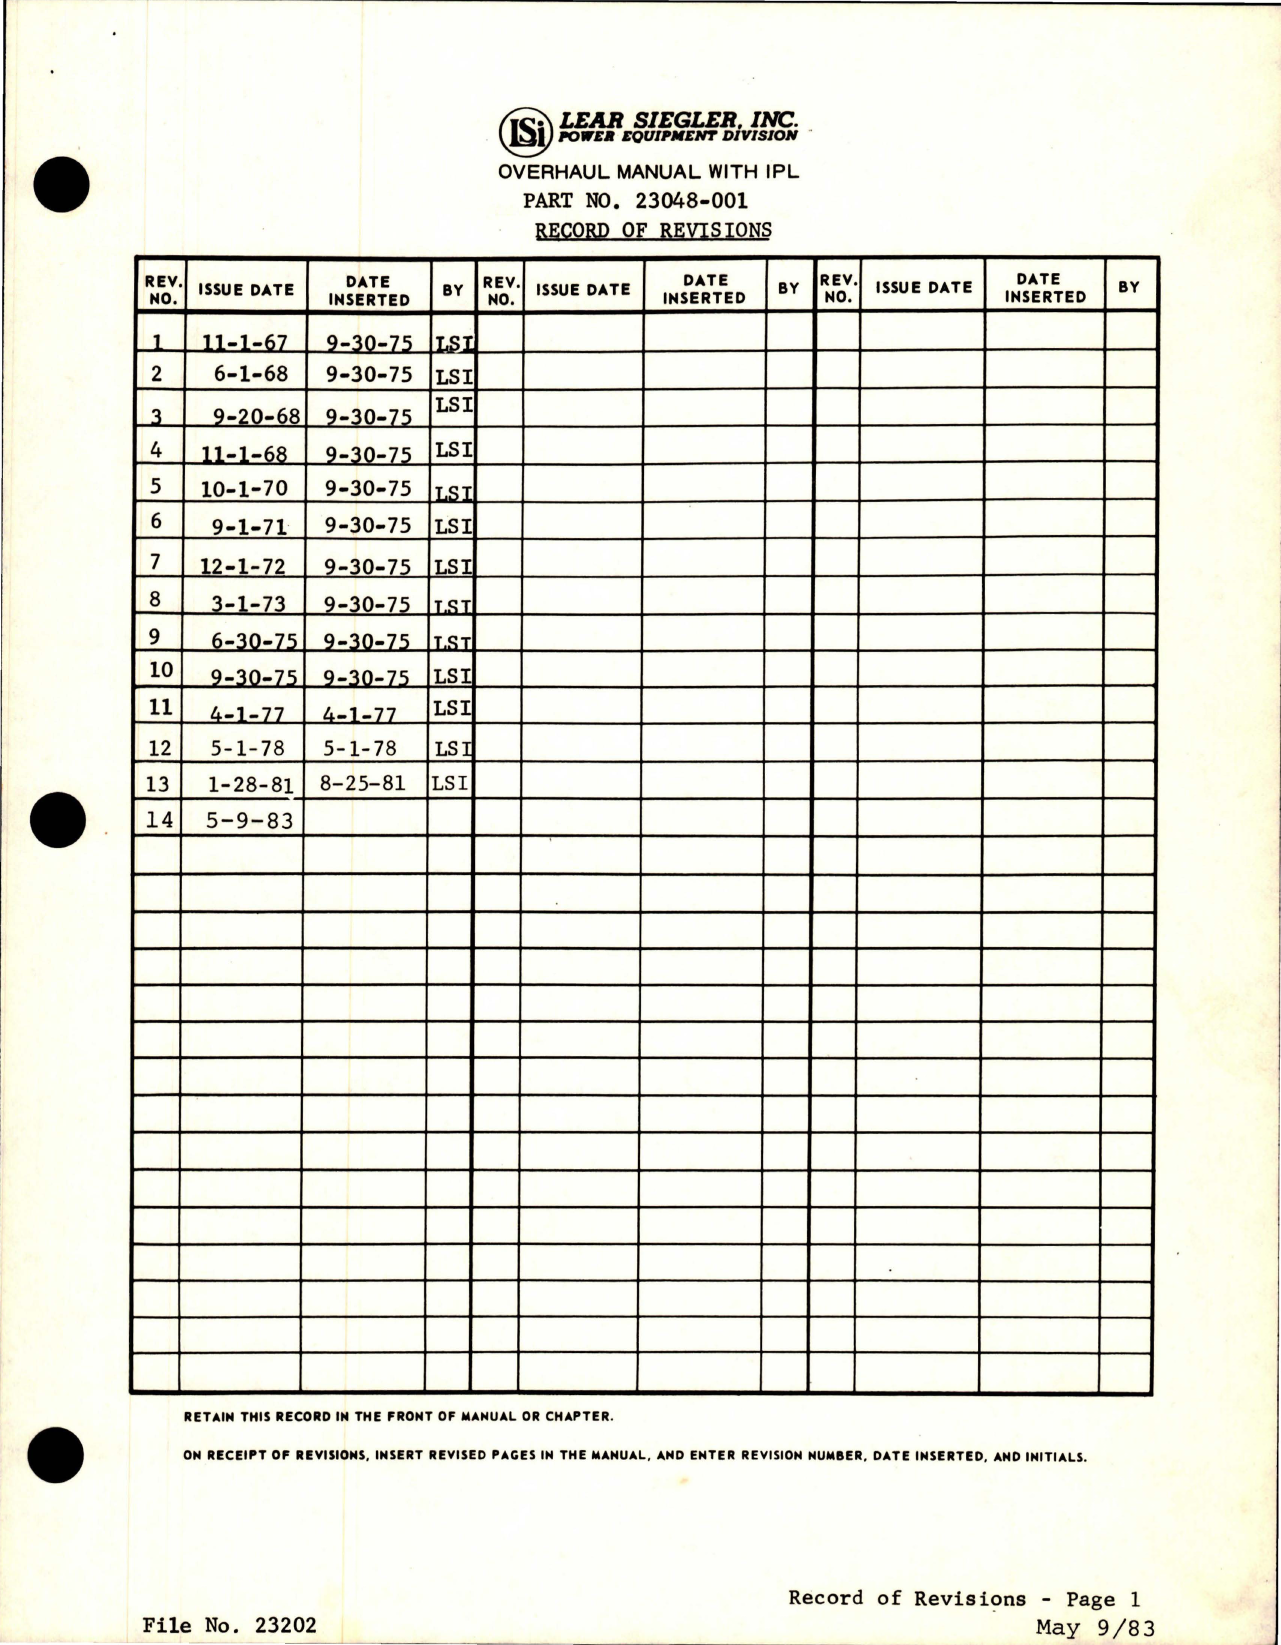 Sample page 5 from AirCorps Library document: Overhaul Manual with Parts List for DC Starter Generator - Model 23048 Series